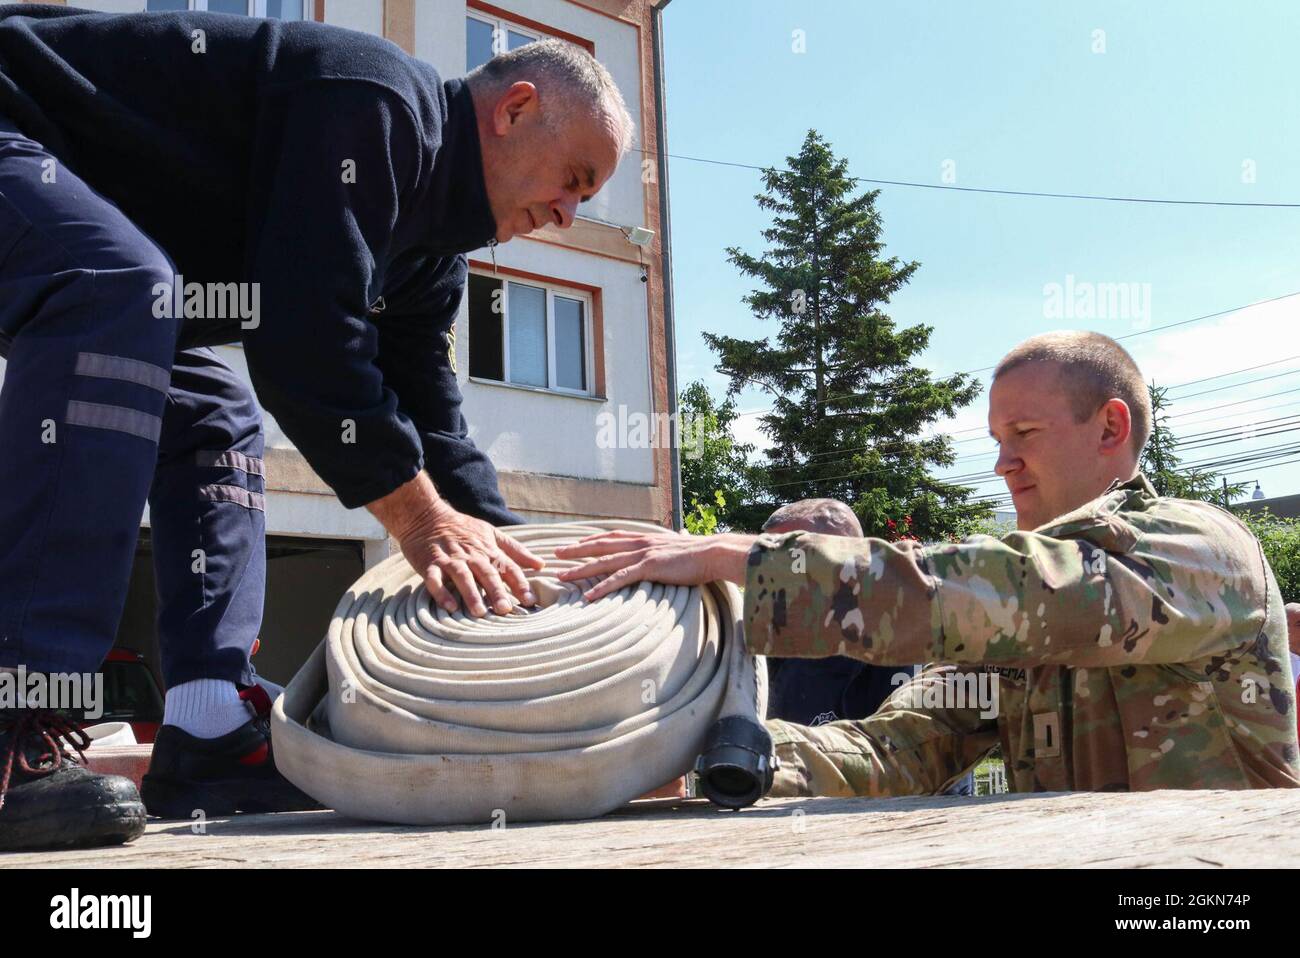 1st Lt. Jacob Bruggeman, officer in charge of the Kilo 21 Liaison Monitoring Team, Regional Command-East, Kosovo Force, helps unload hoses at the Fire Department in Ferizaj/Urosevac, Kosovo, on June 3, 2021. The Camp Bondsteel Fire Department and Kilo 21 worked together to donate 140 sections of hoses to the municipality’s only firefighting team. Stock Photo